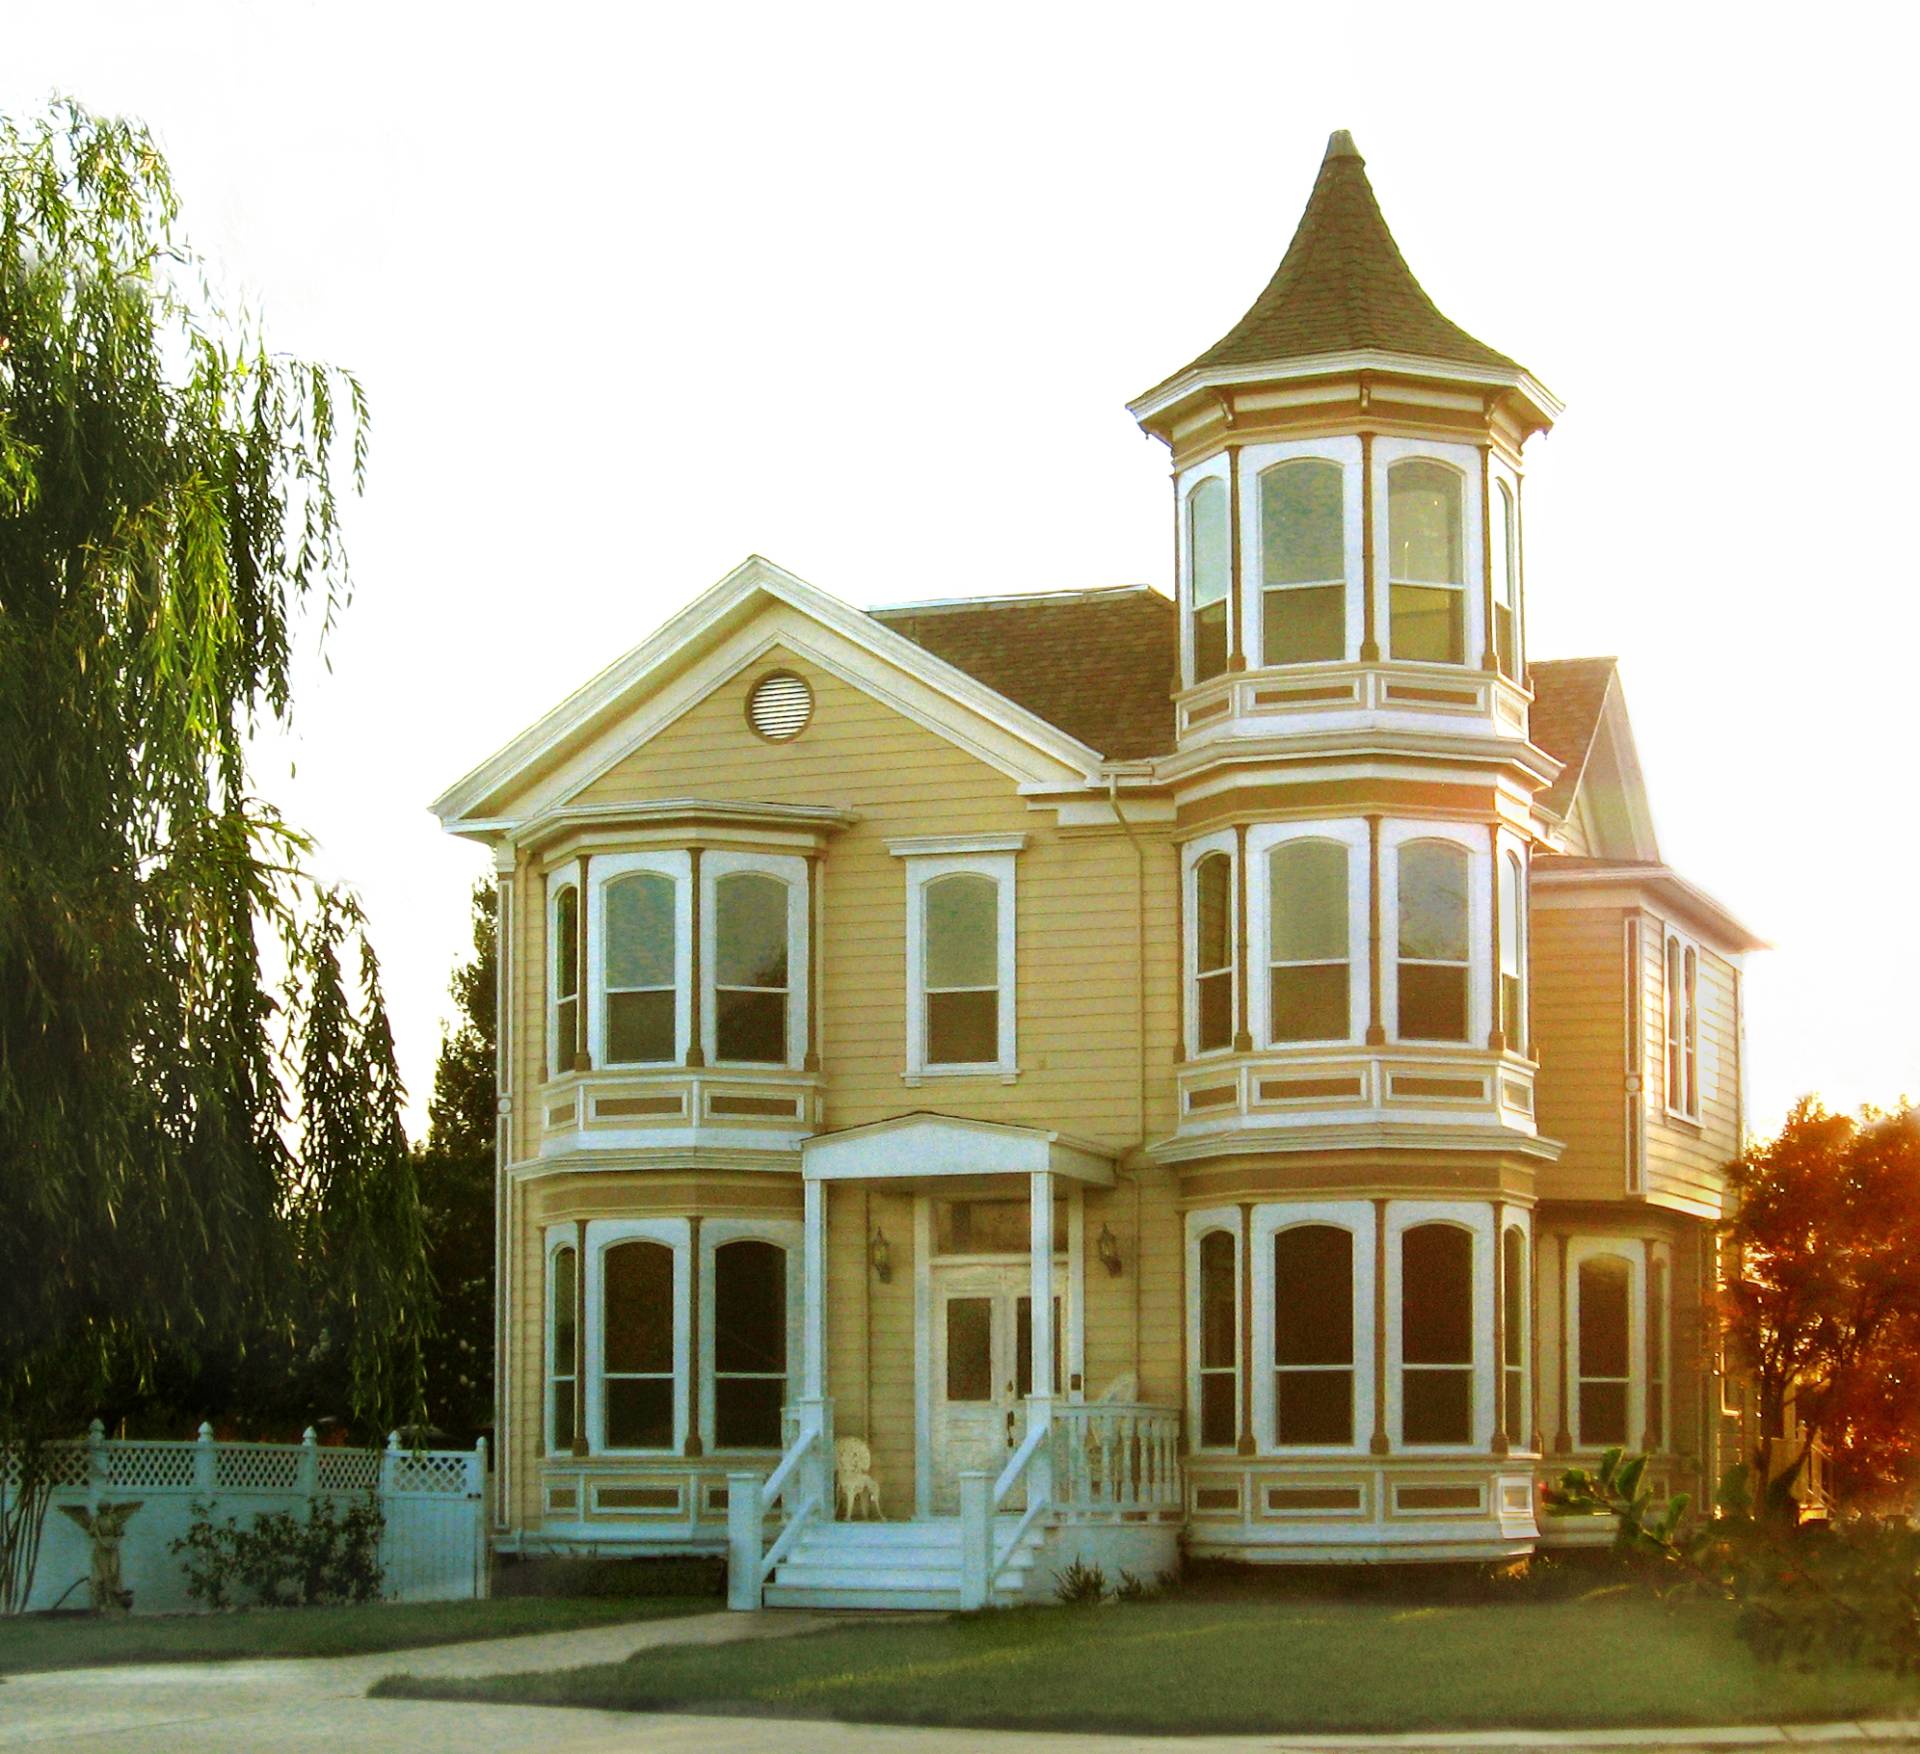 Built in 1877, the Walter B. Wood House is one of Modesto's few remaining examples of Victorian architecture. The building is listed in the National Registry of Historic Places.